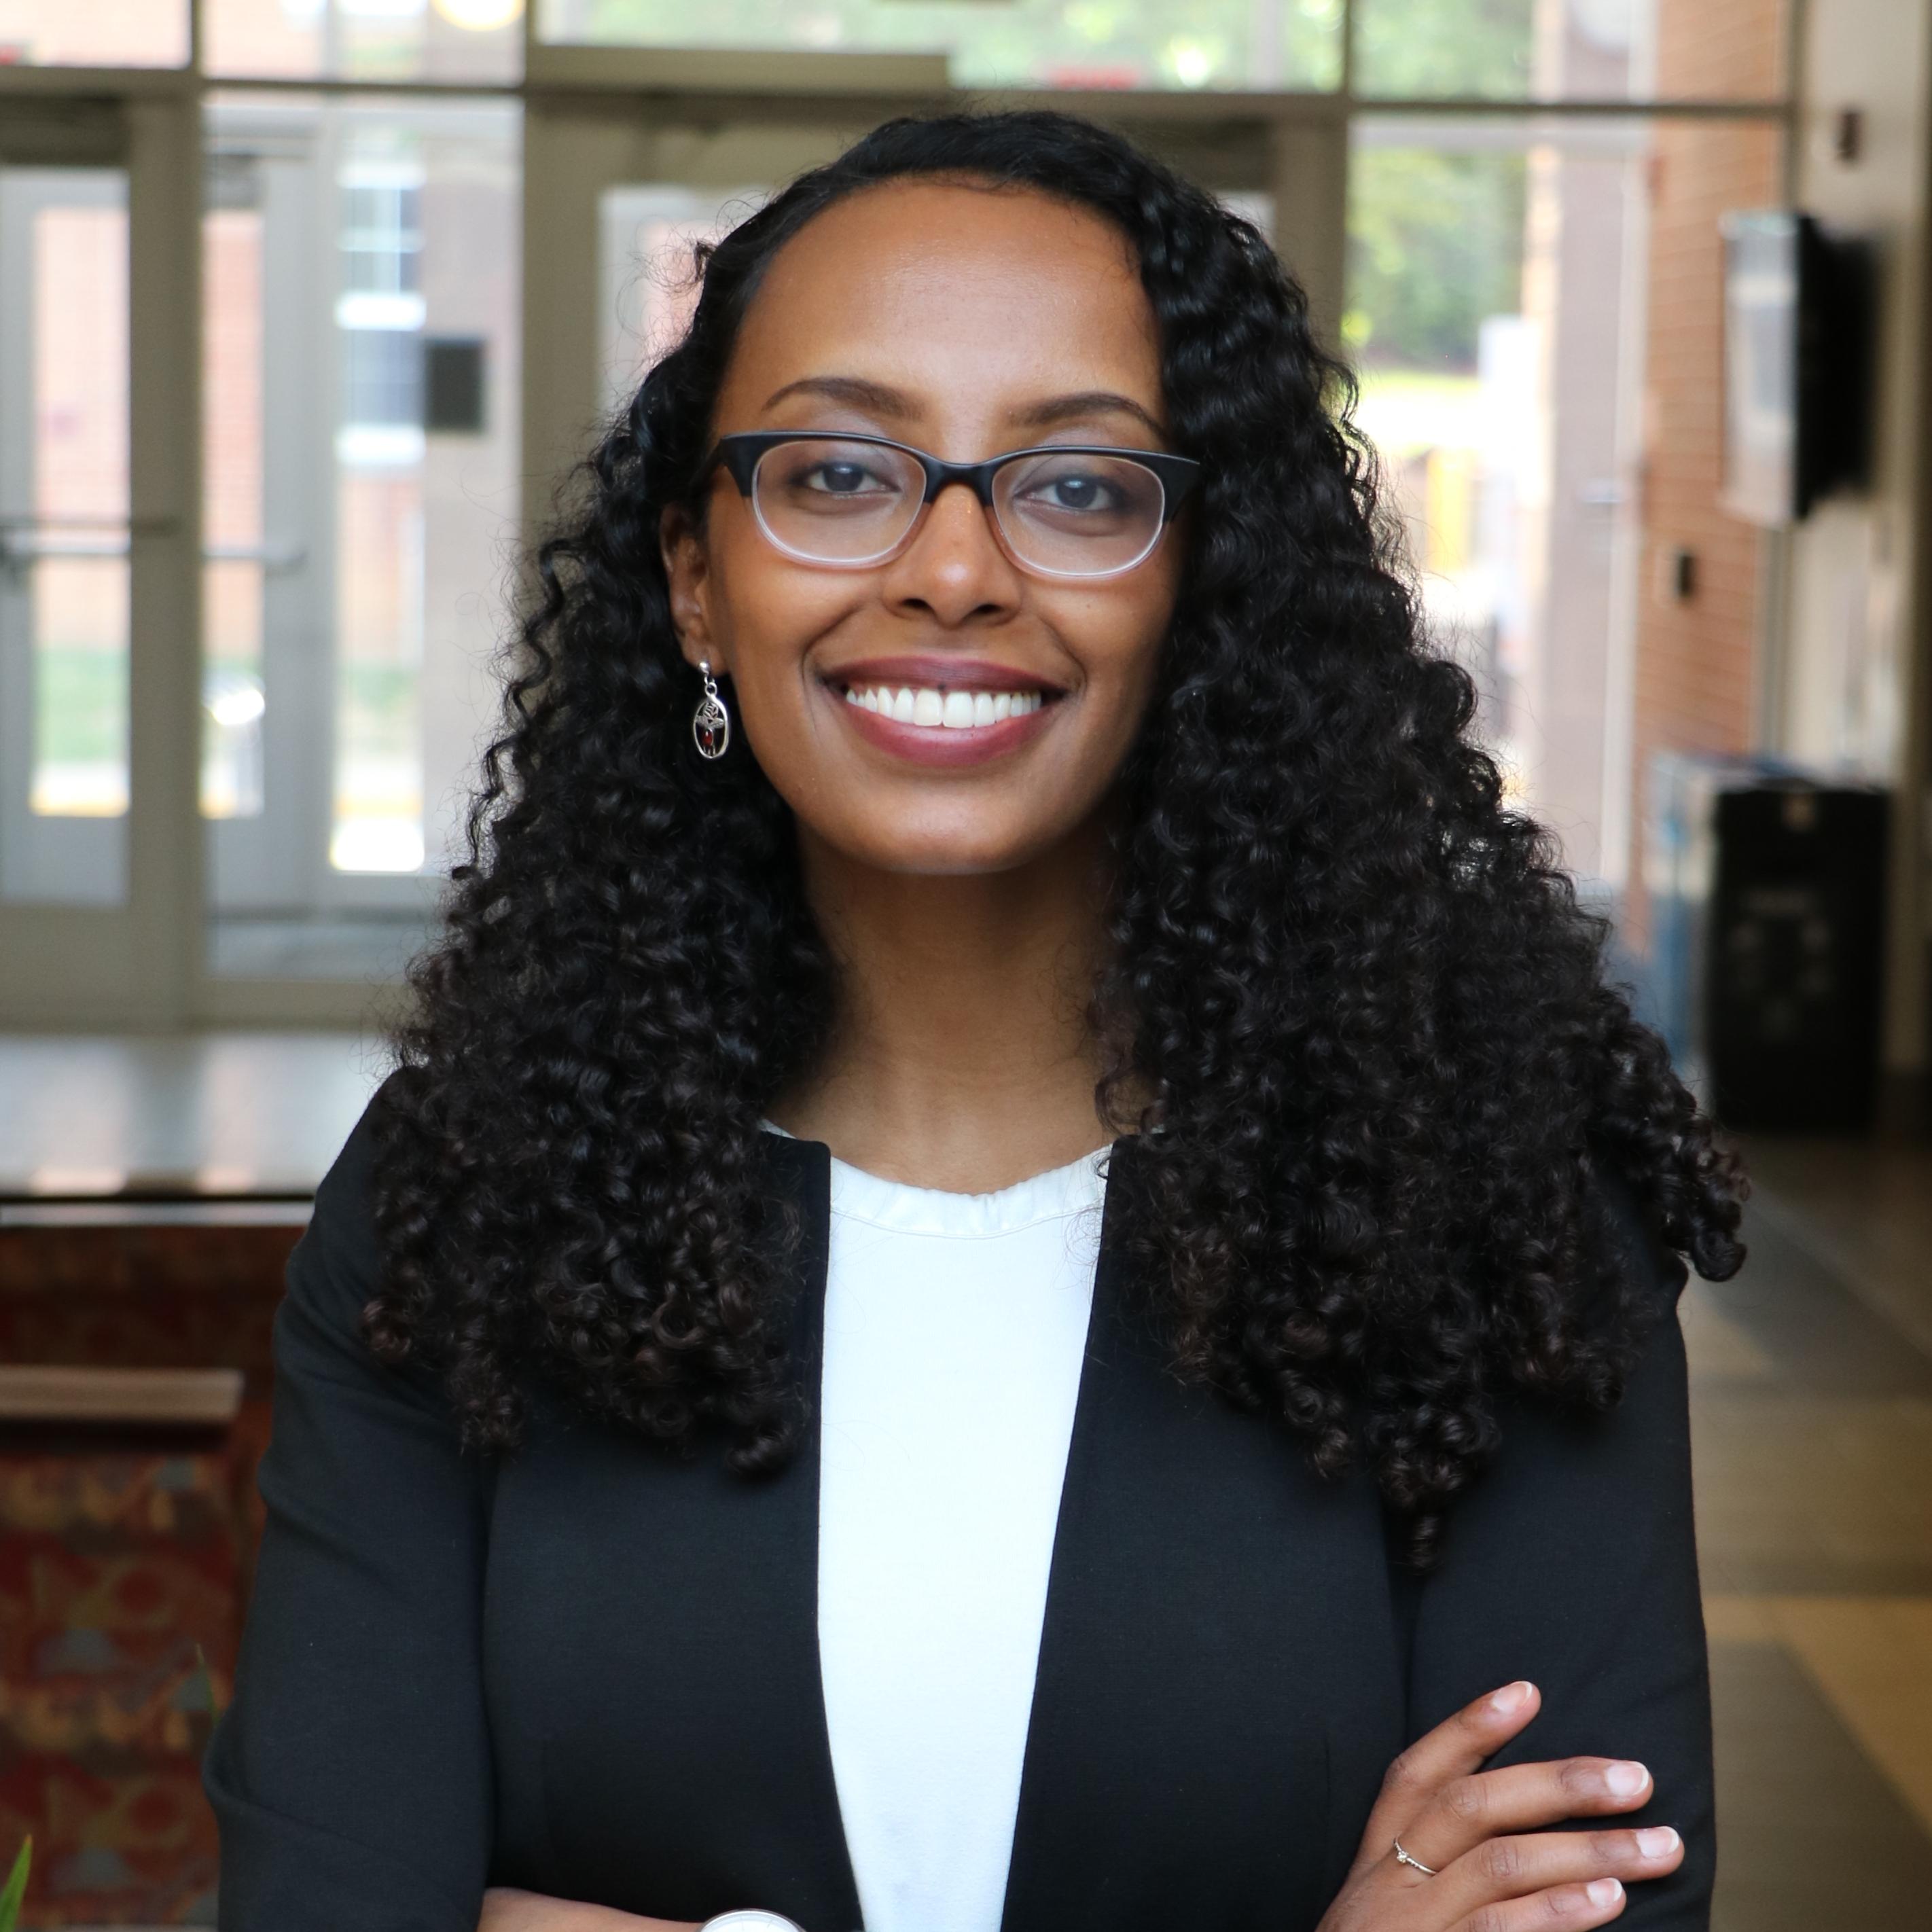 Bemnet Faris, staff member of School of Public Health at the University of Maryland 